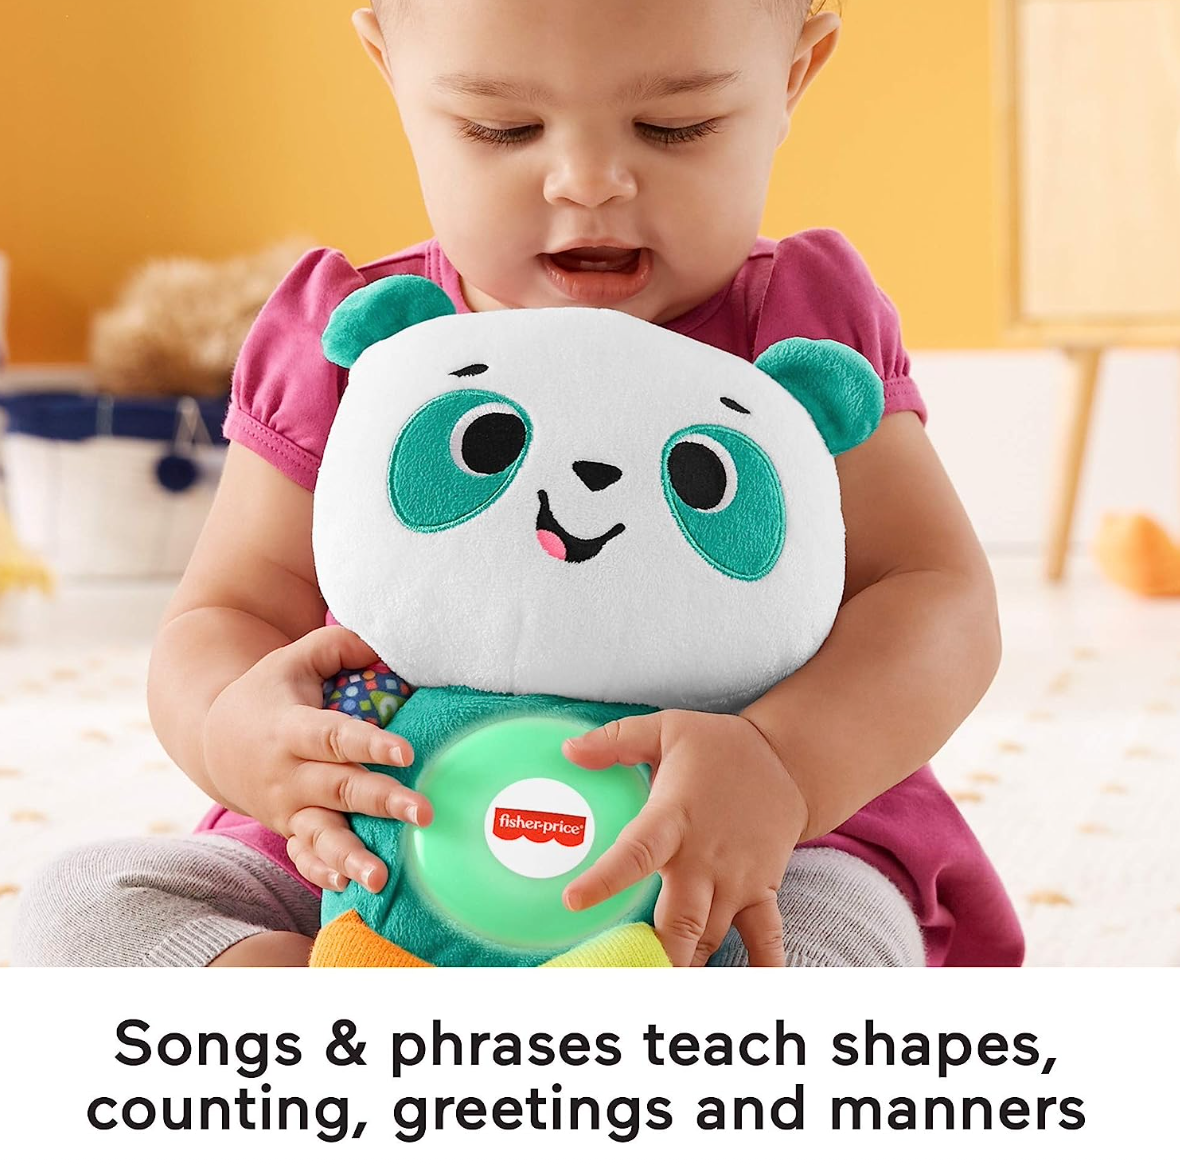 Fisher-Price Linkimals Baby & Toddler Toy Play Together Panda Plush With Interactive Music & Lights For Ages 9+ Months